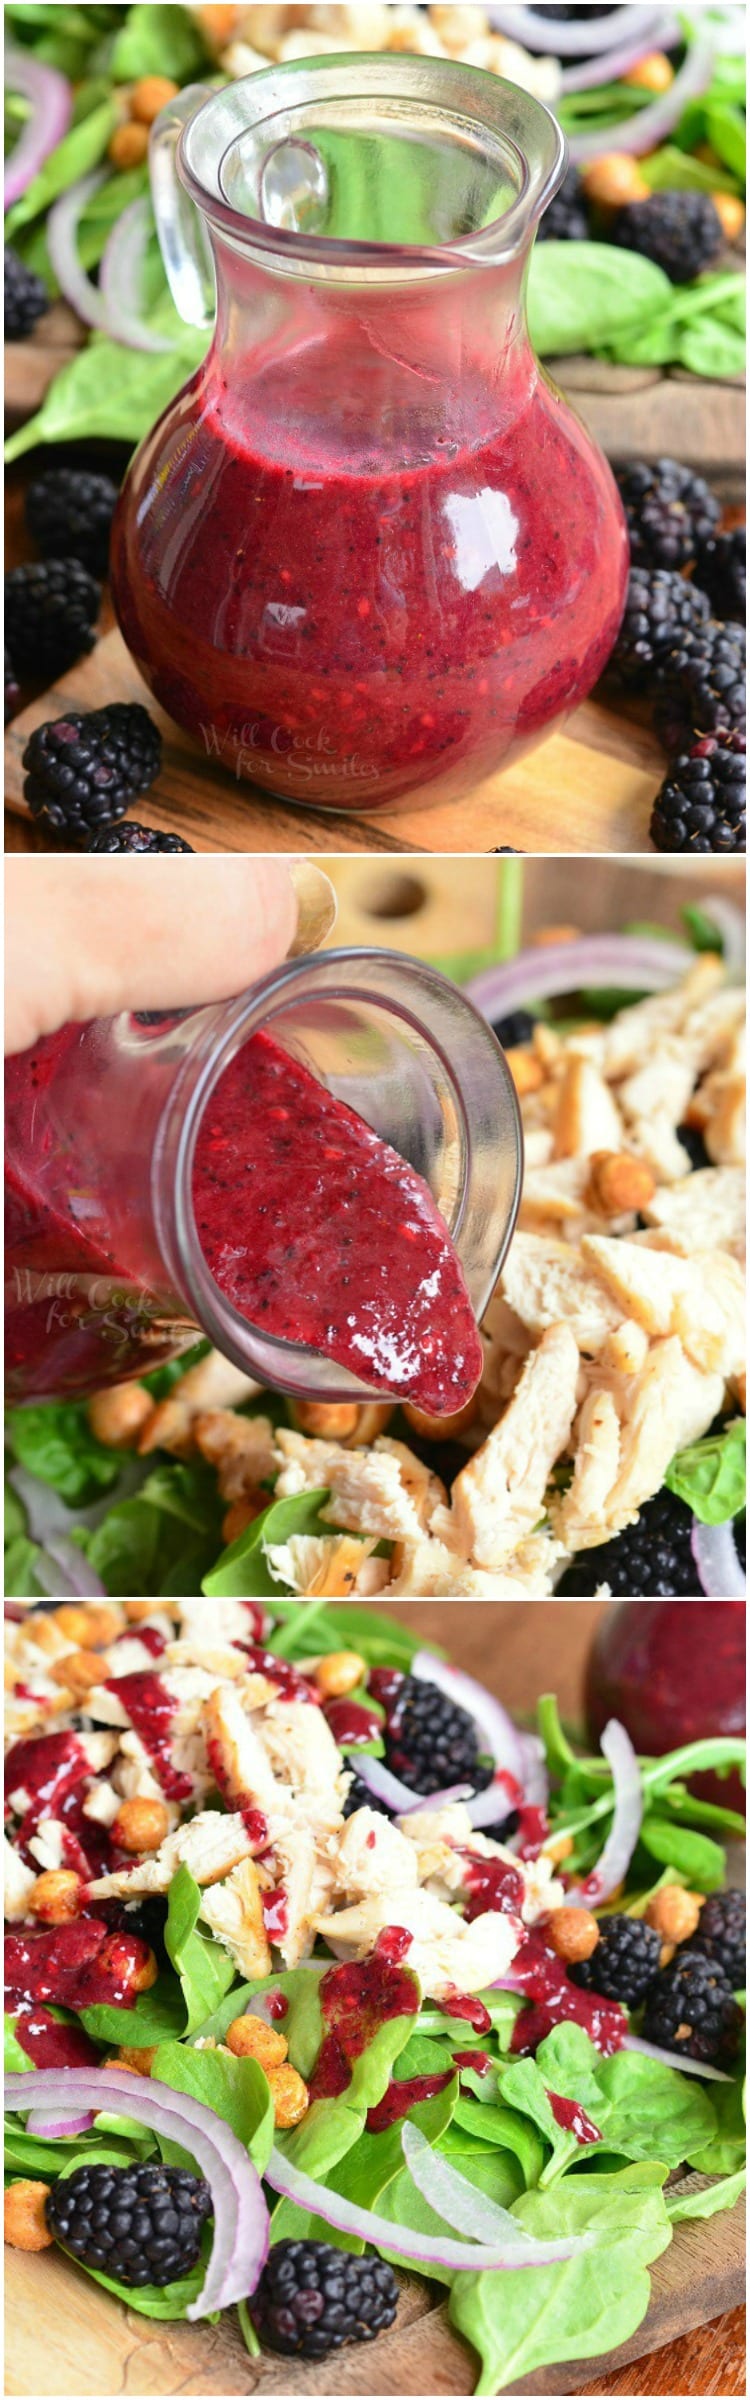 photo collage top photo of vinaigrette in a container, 2nd photo of vinaigrette being poured over salad, last phot of salad with vinaigrette 